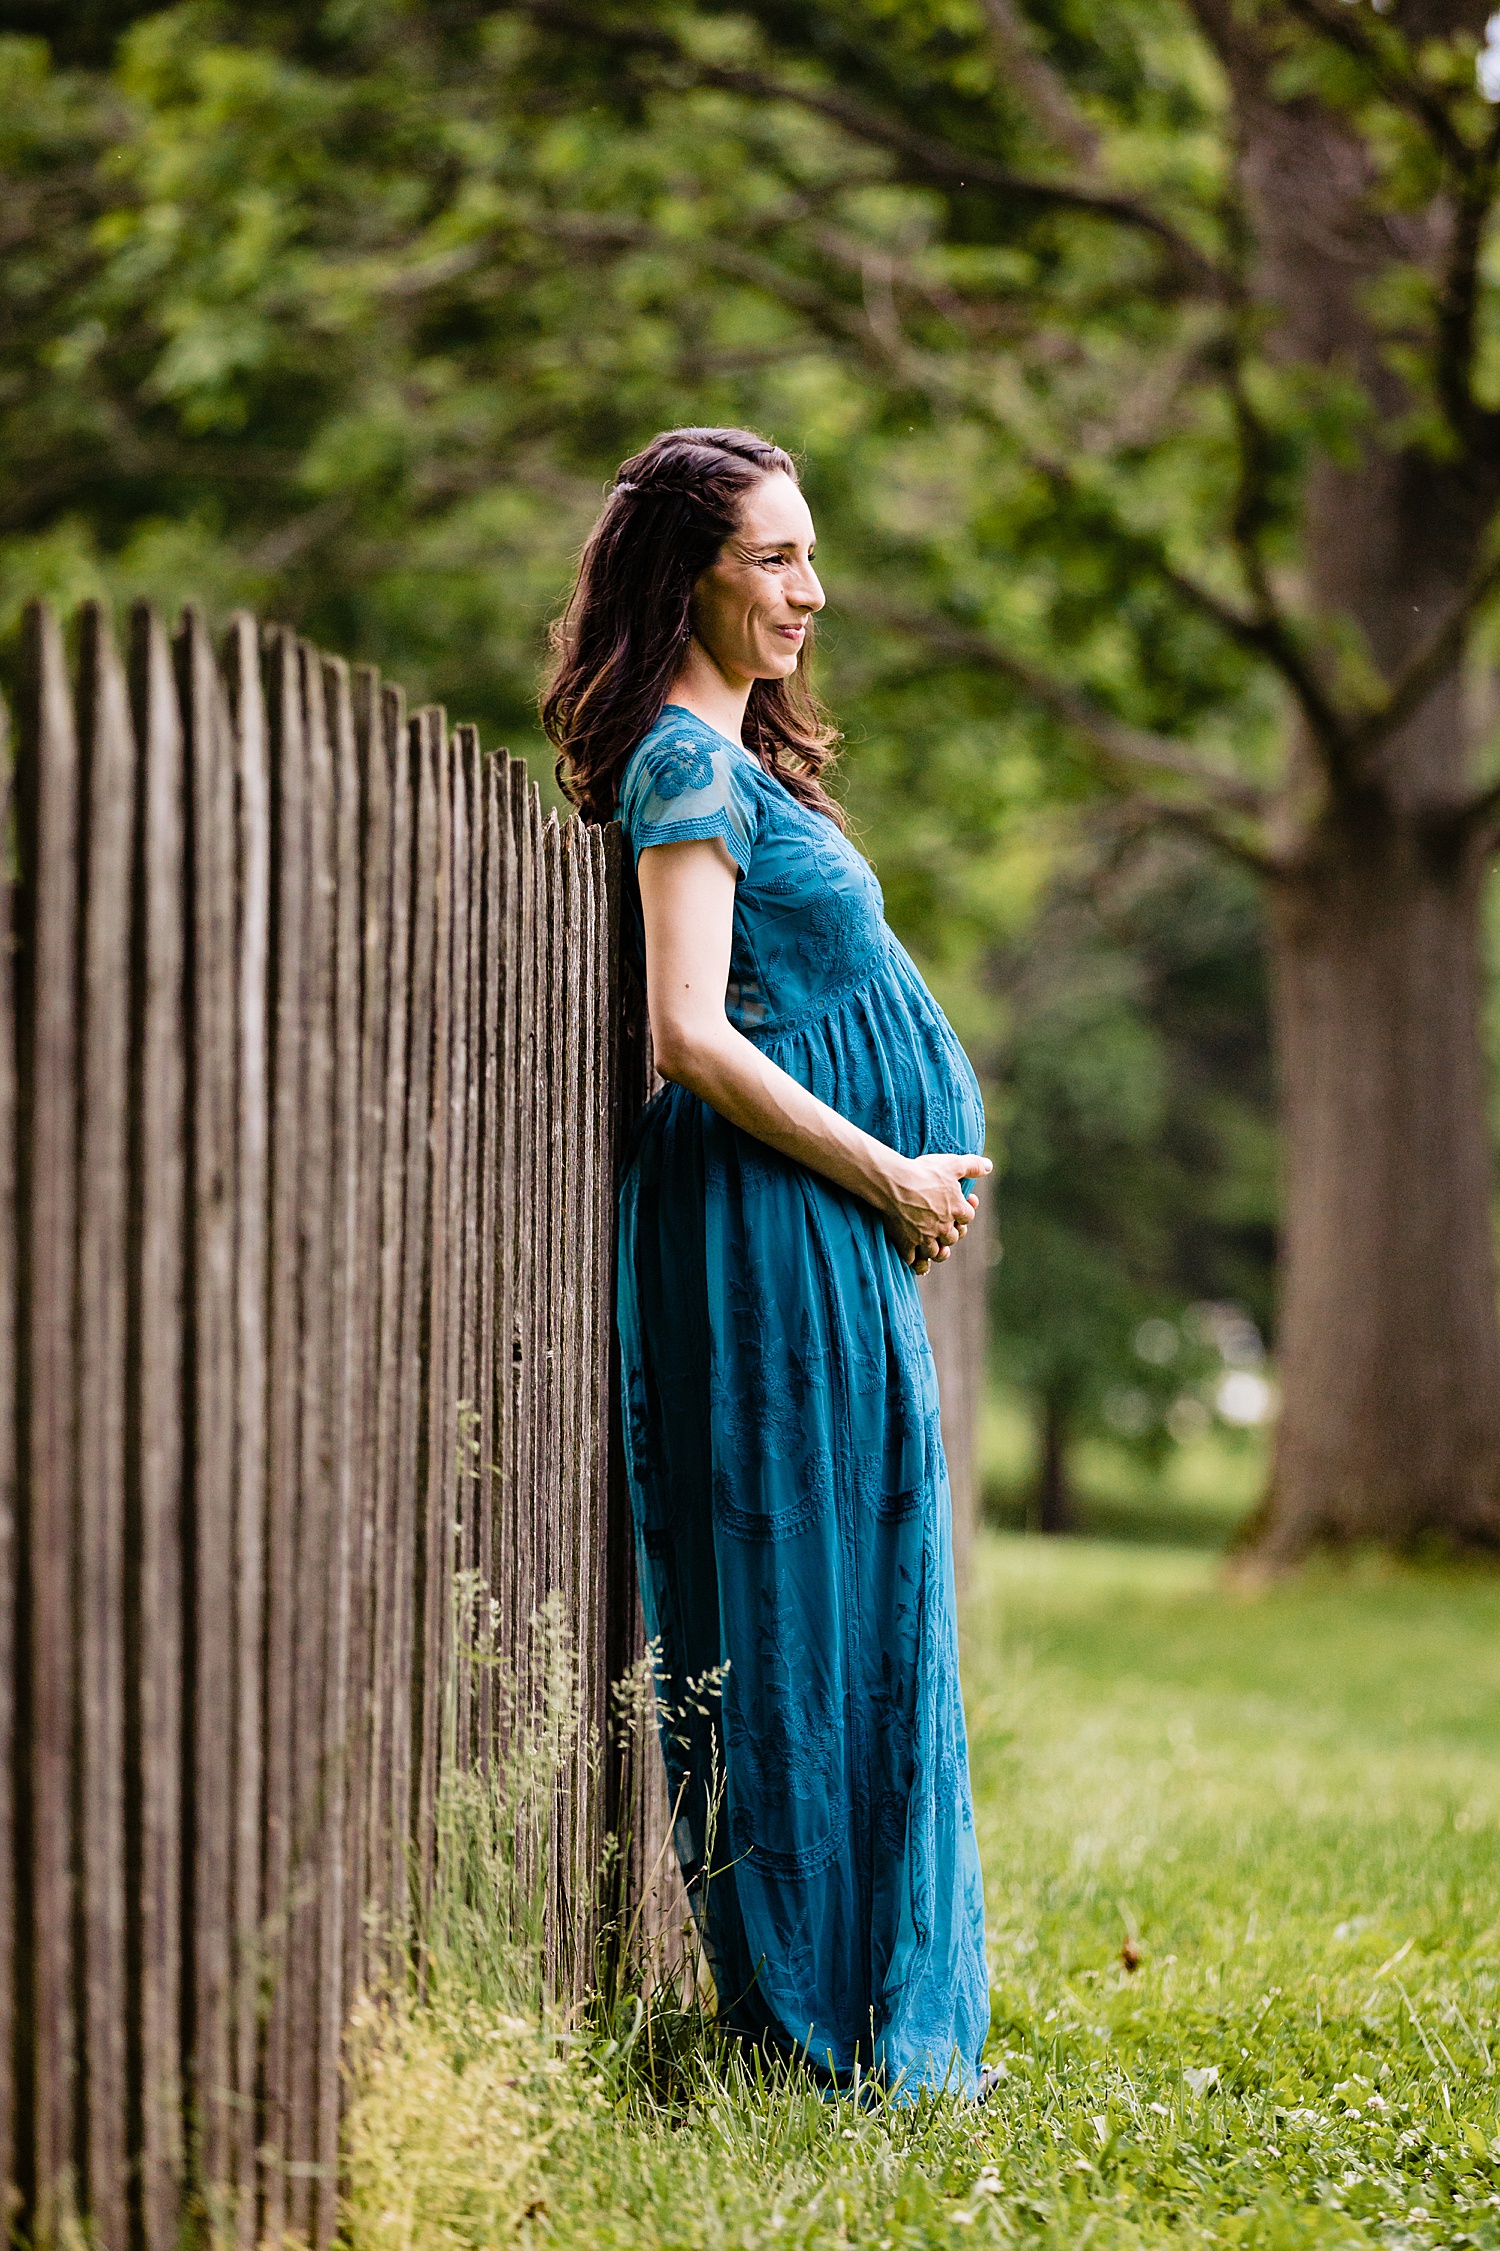 Gring's Grings Mill Red Covered Bridge Heritage Center Wyomissing Pennsylvania maternity session portrait photographer